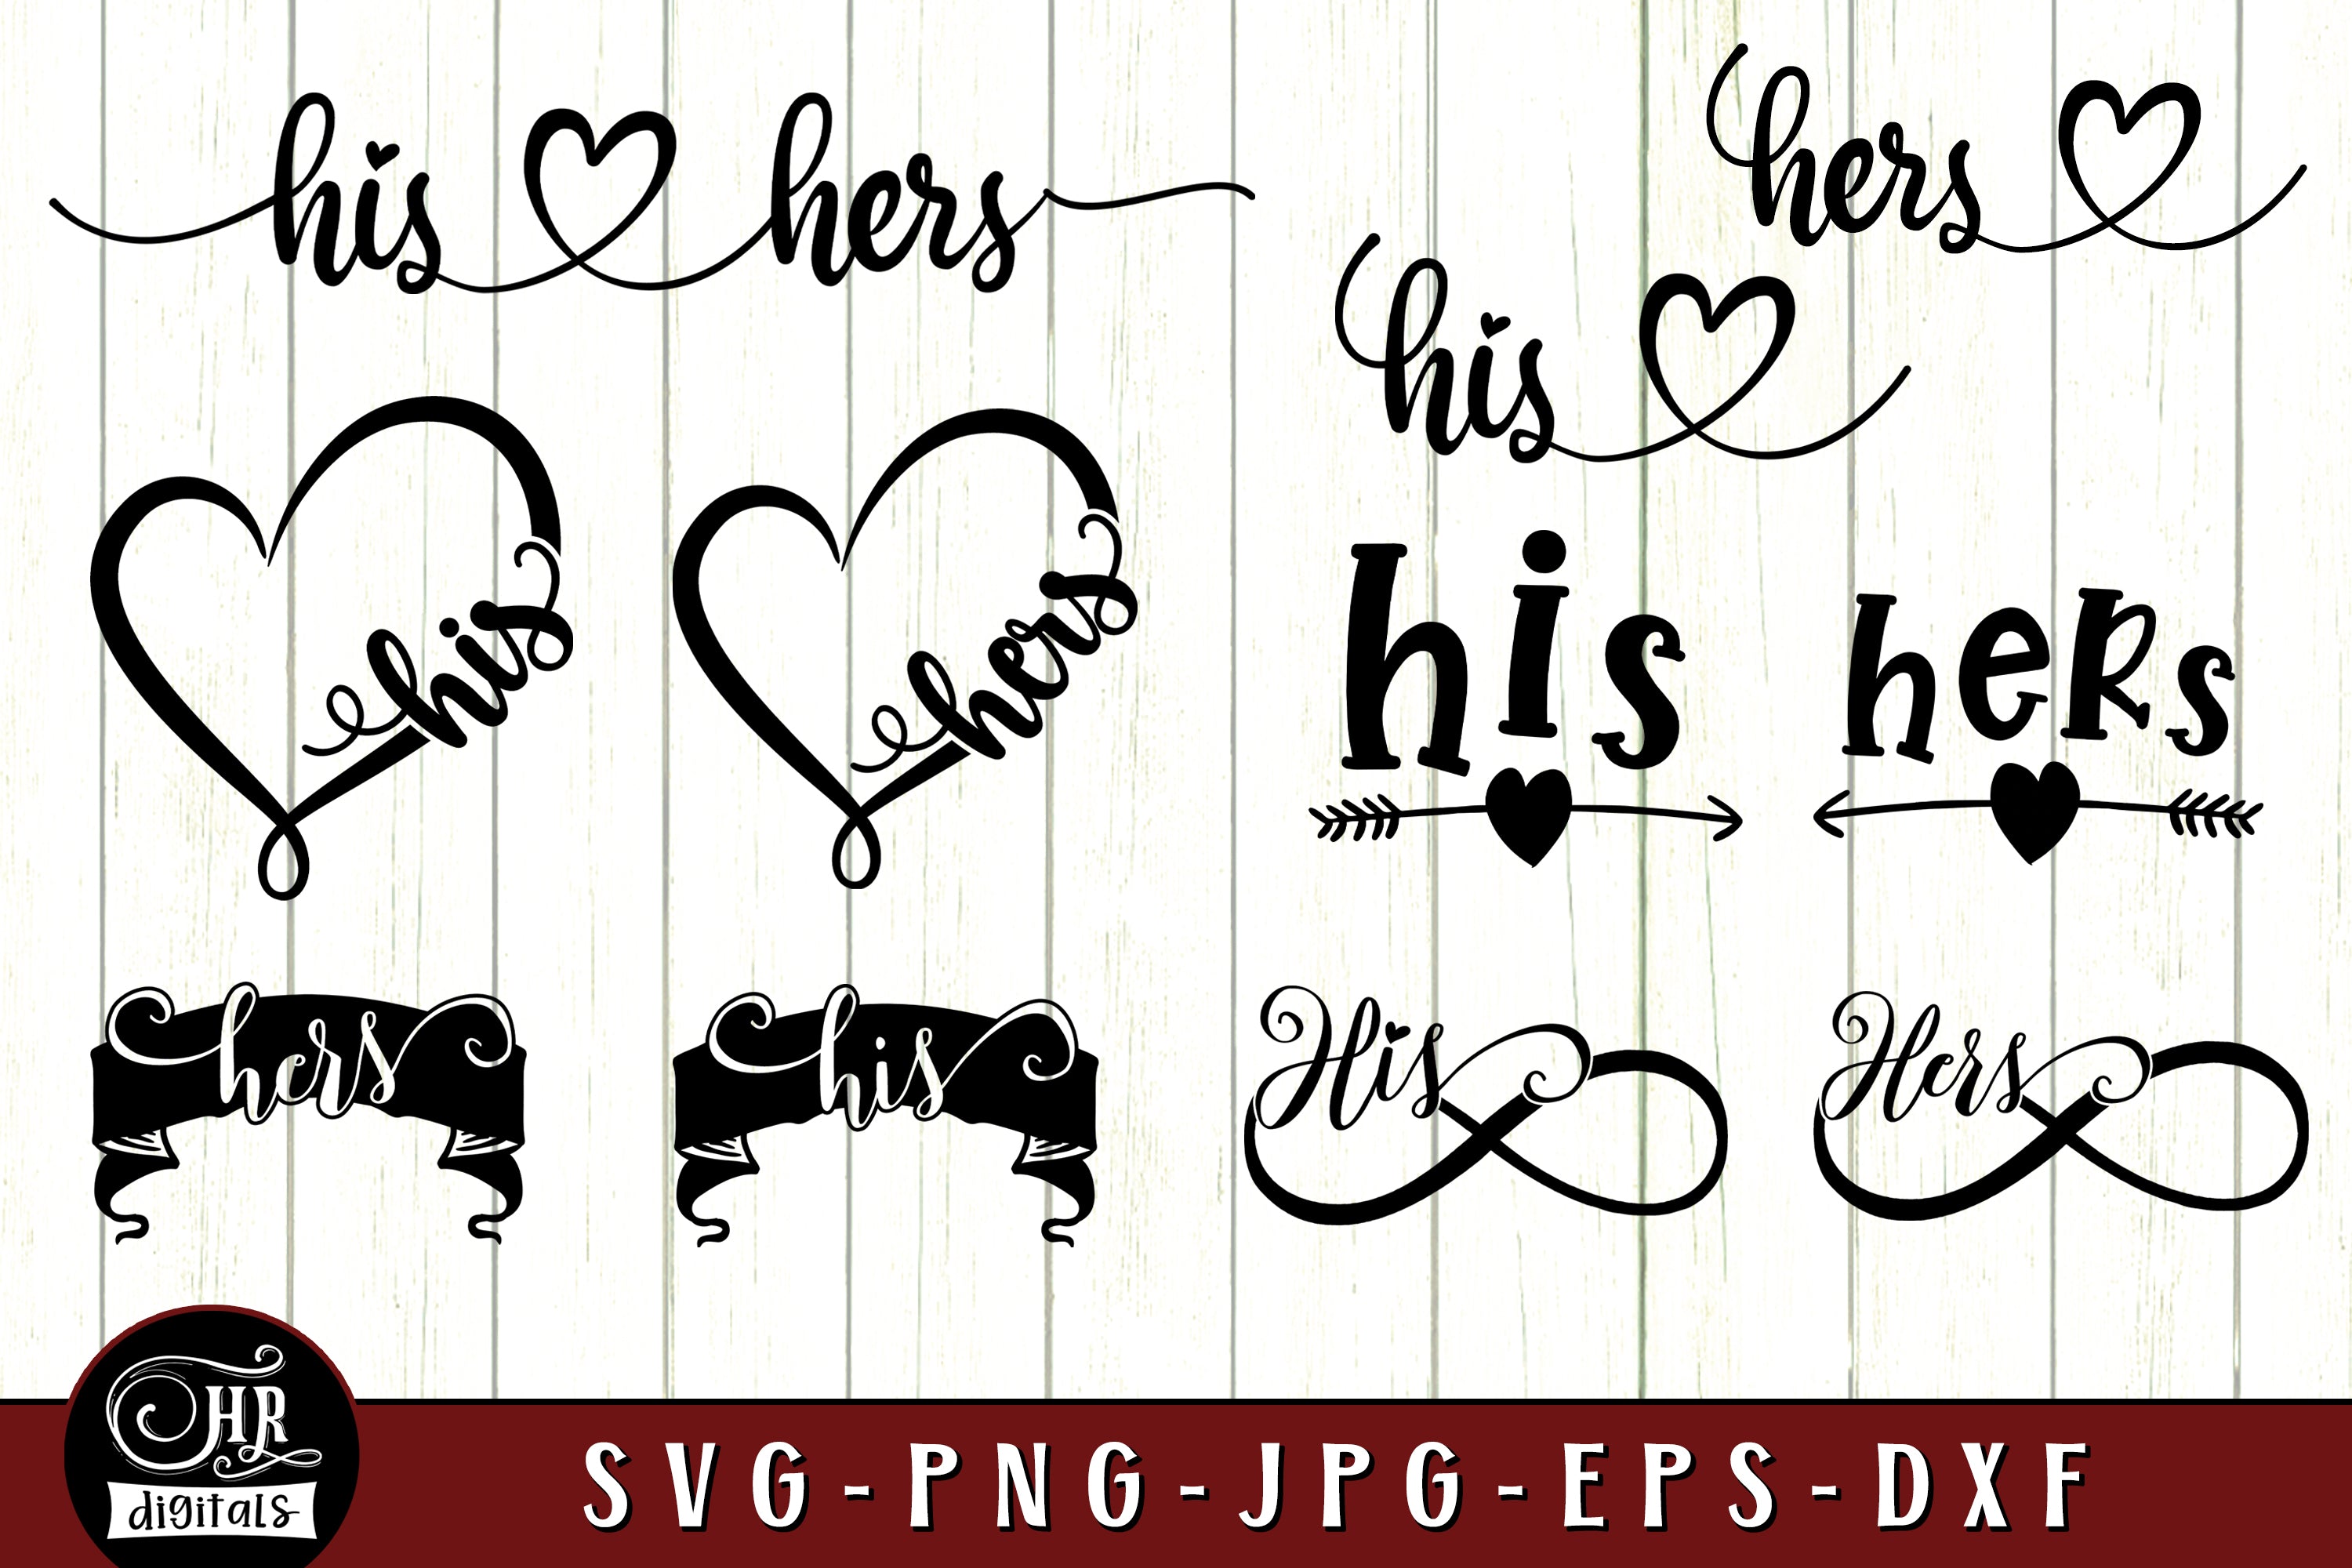 His and Hers SVG Bundle, Couples Gift Idea, Matching Couples SVG